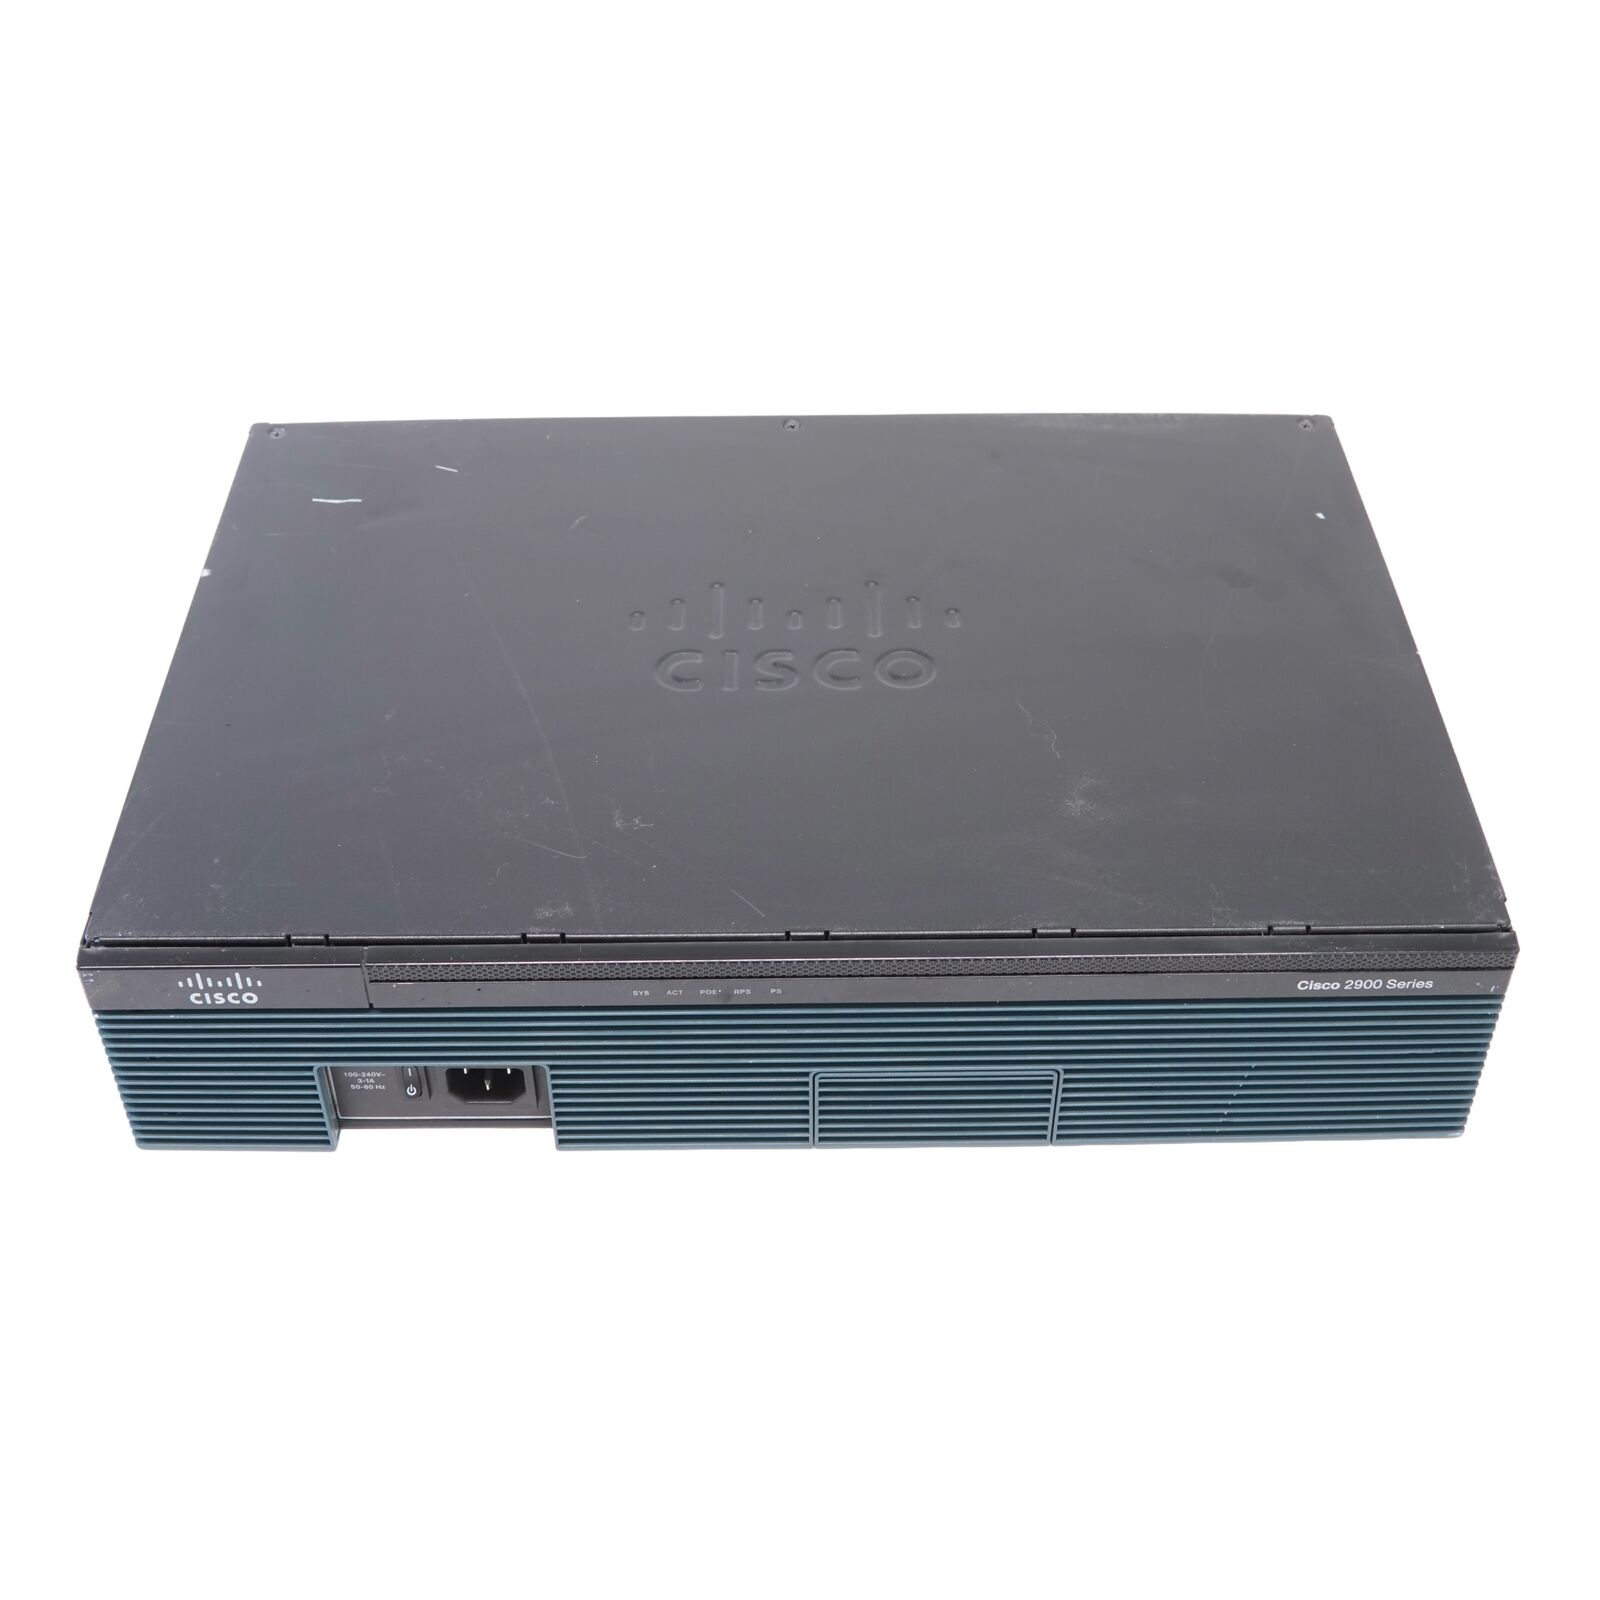 Cisco 2900 Series CISCO2911/K9 Integrated Services Router